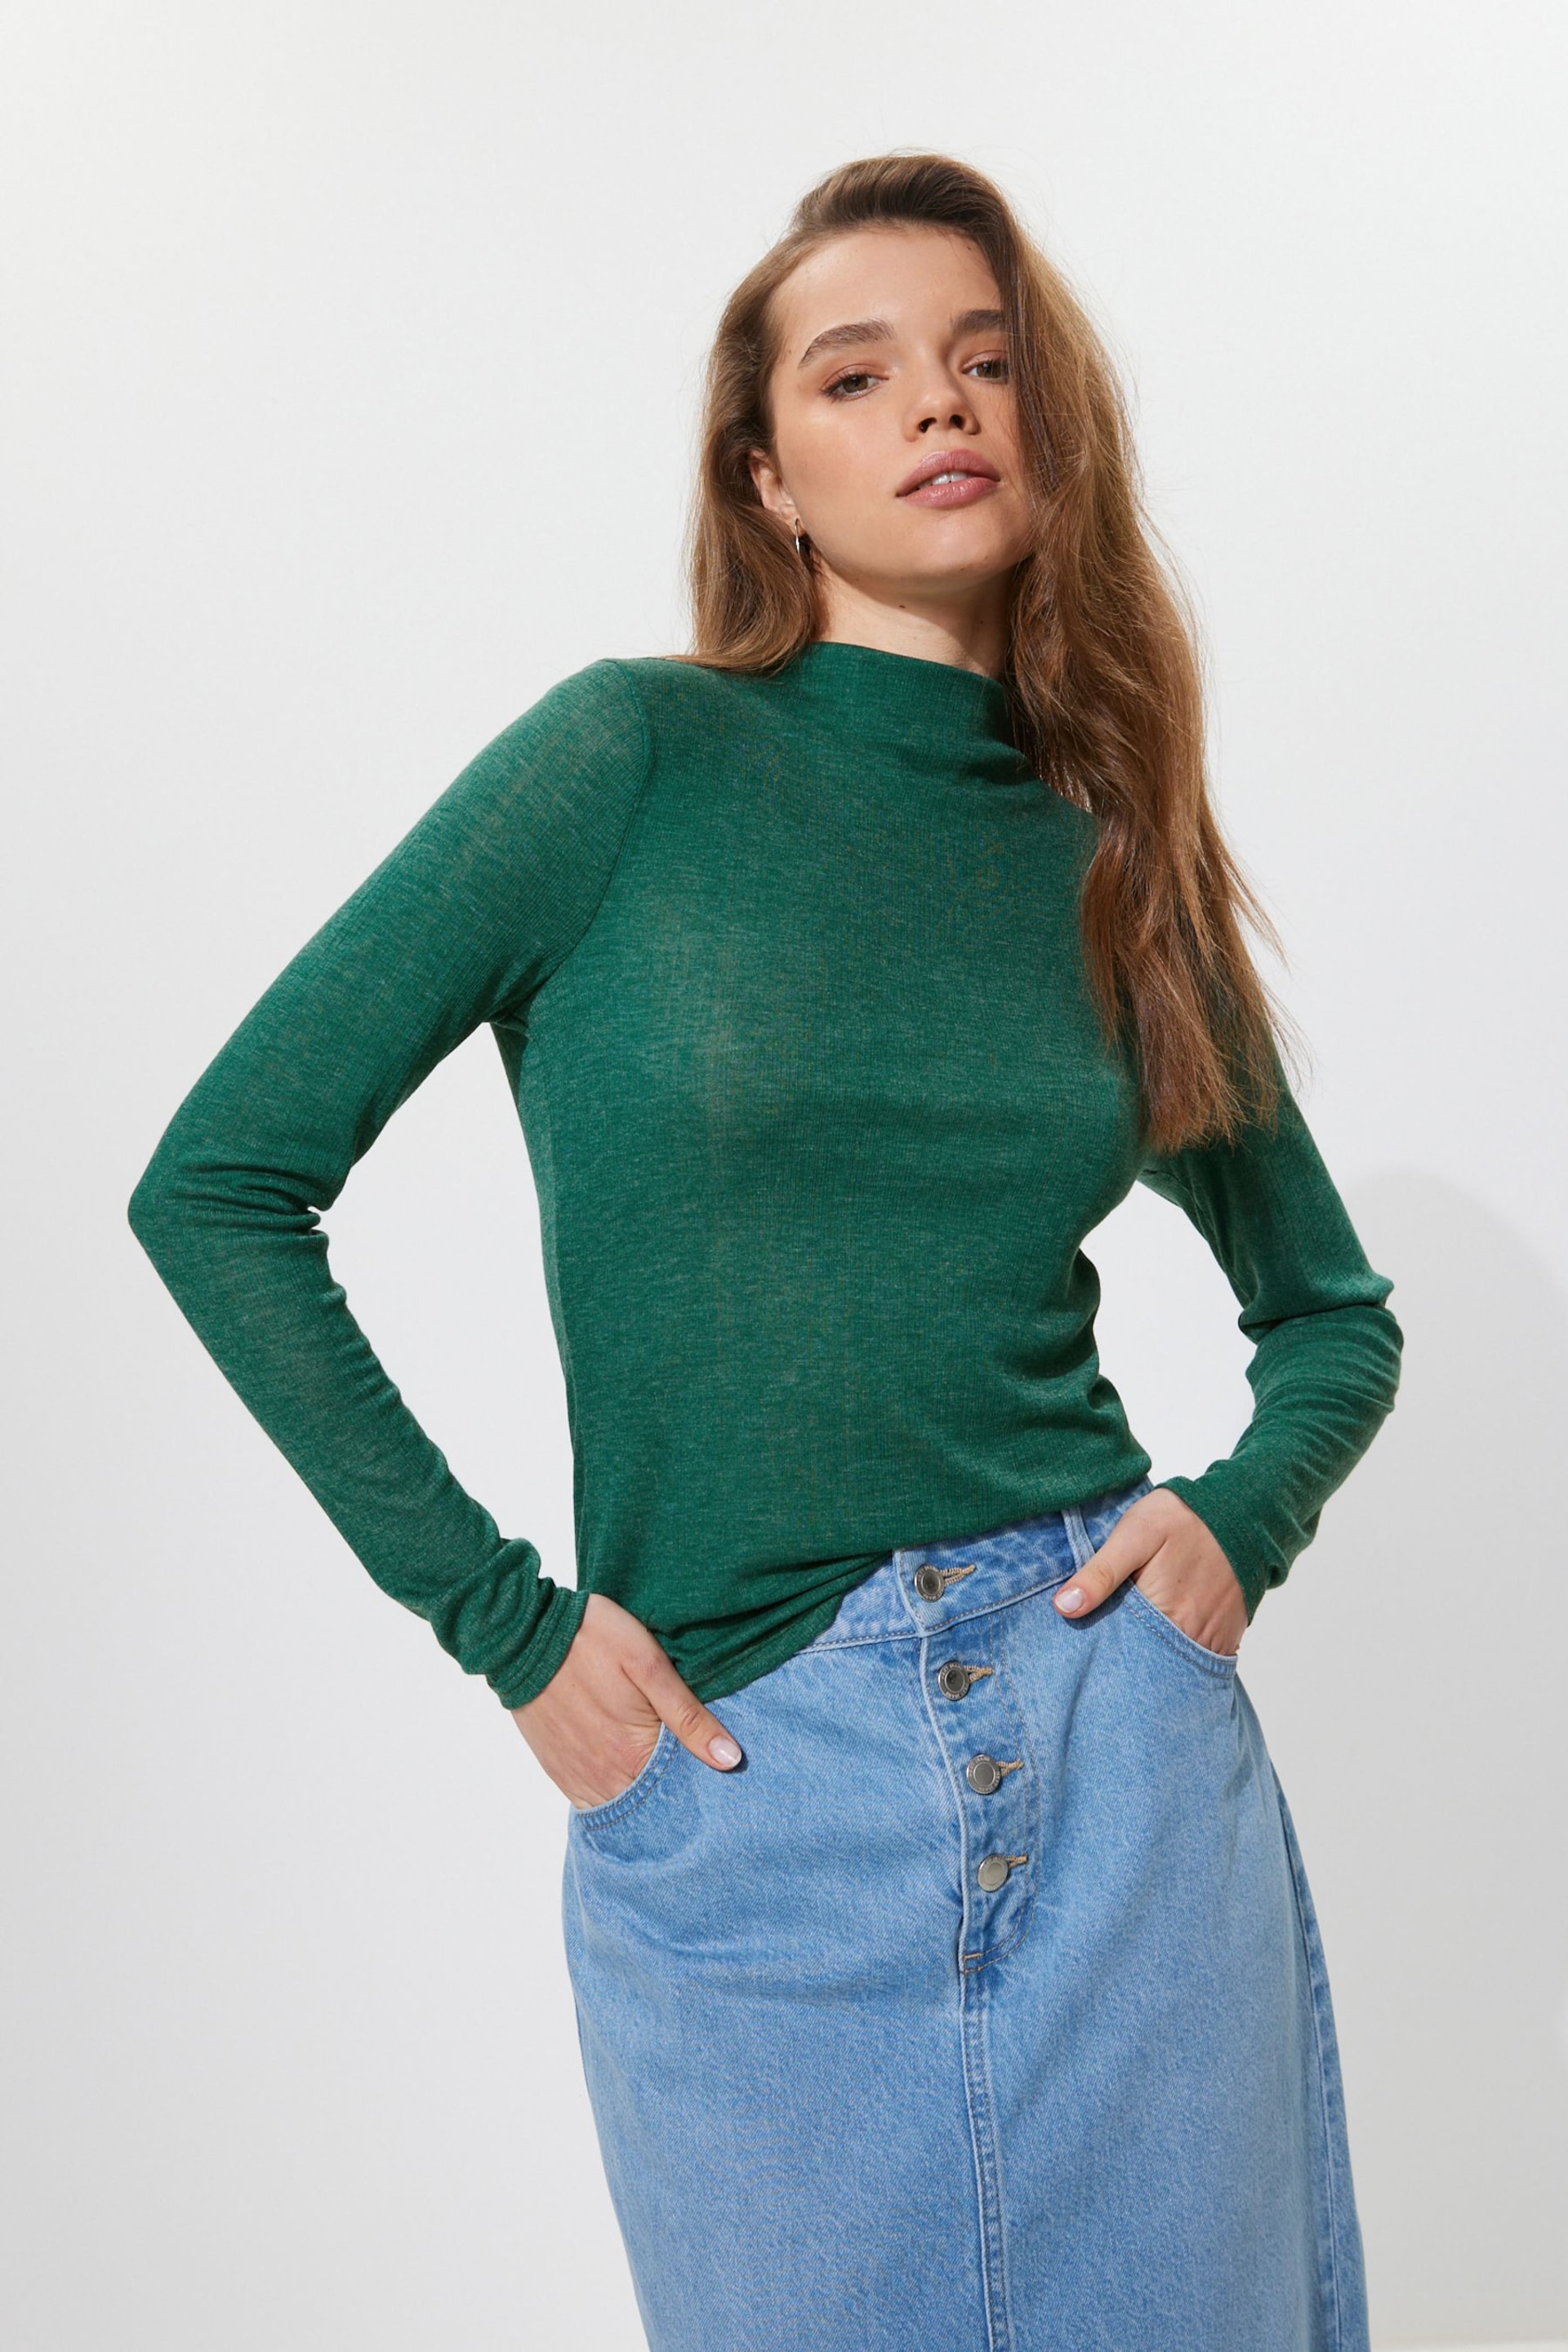 Forest Green Long Sleeve High Neck Semi-Sheer Top - Image 1 of 6